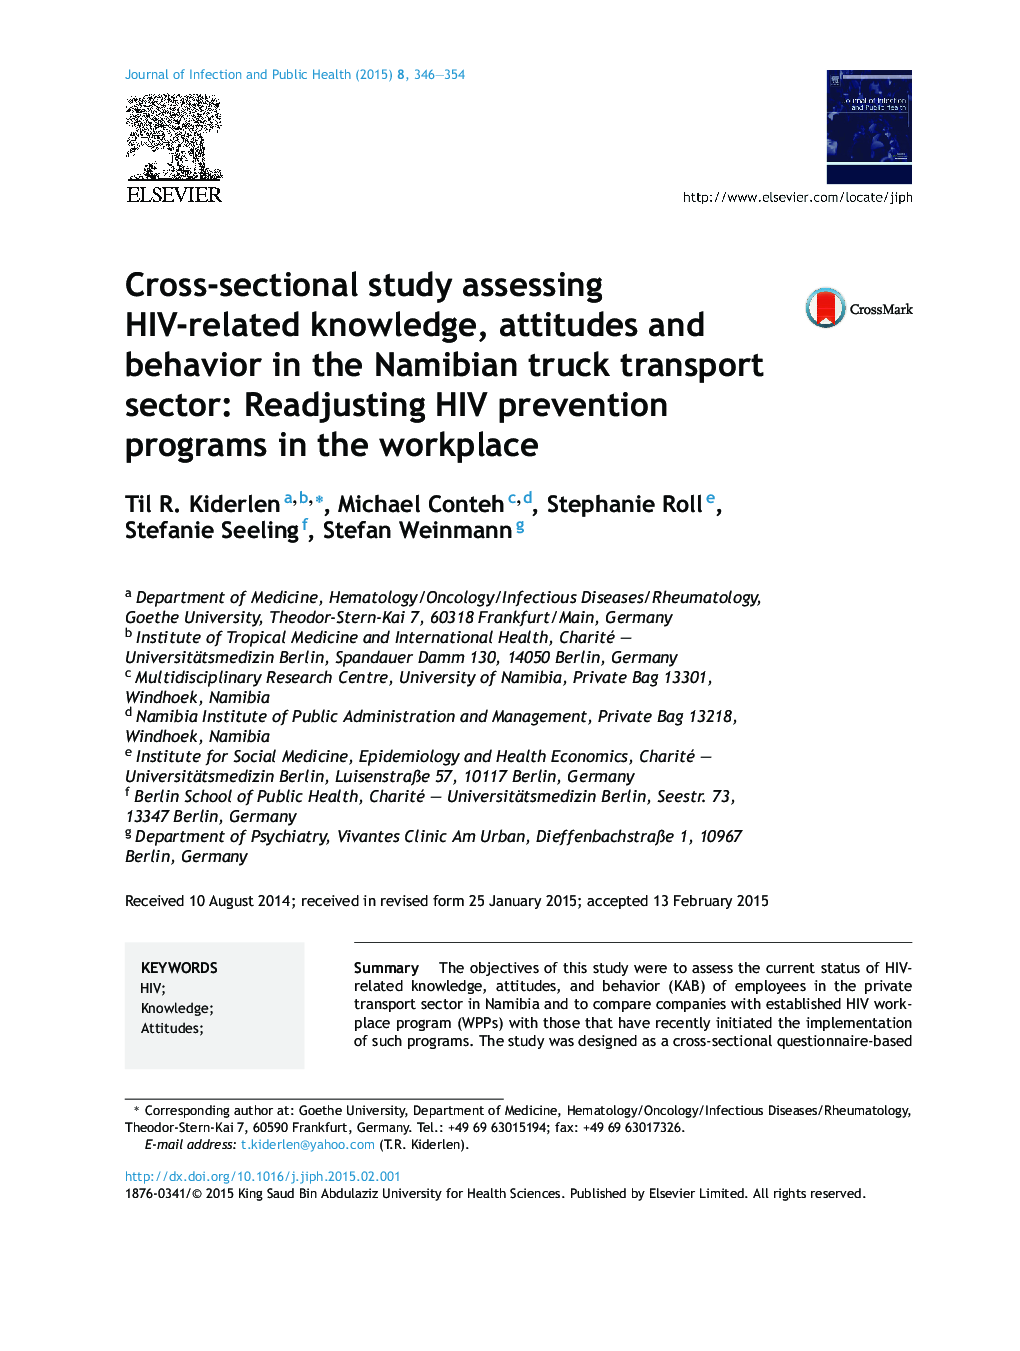 Cross-sectional study assessing HIV-related knowledge, attitudes and behavior in the Namibian truck transport sector: Readjusting HIV prevention programs in the workplace